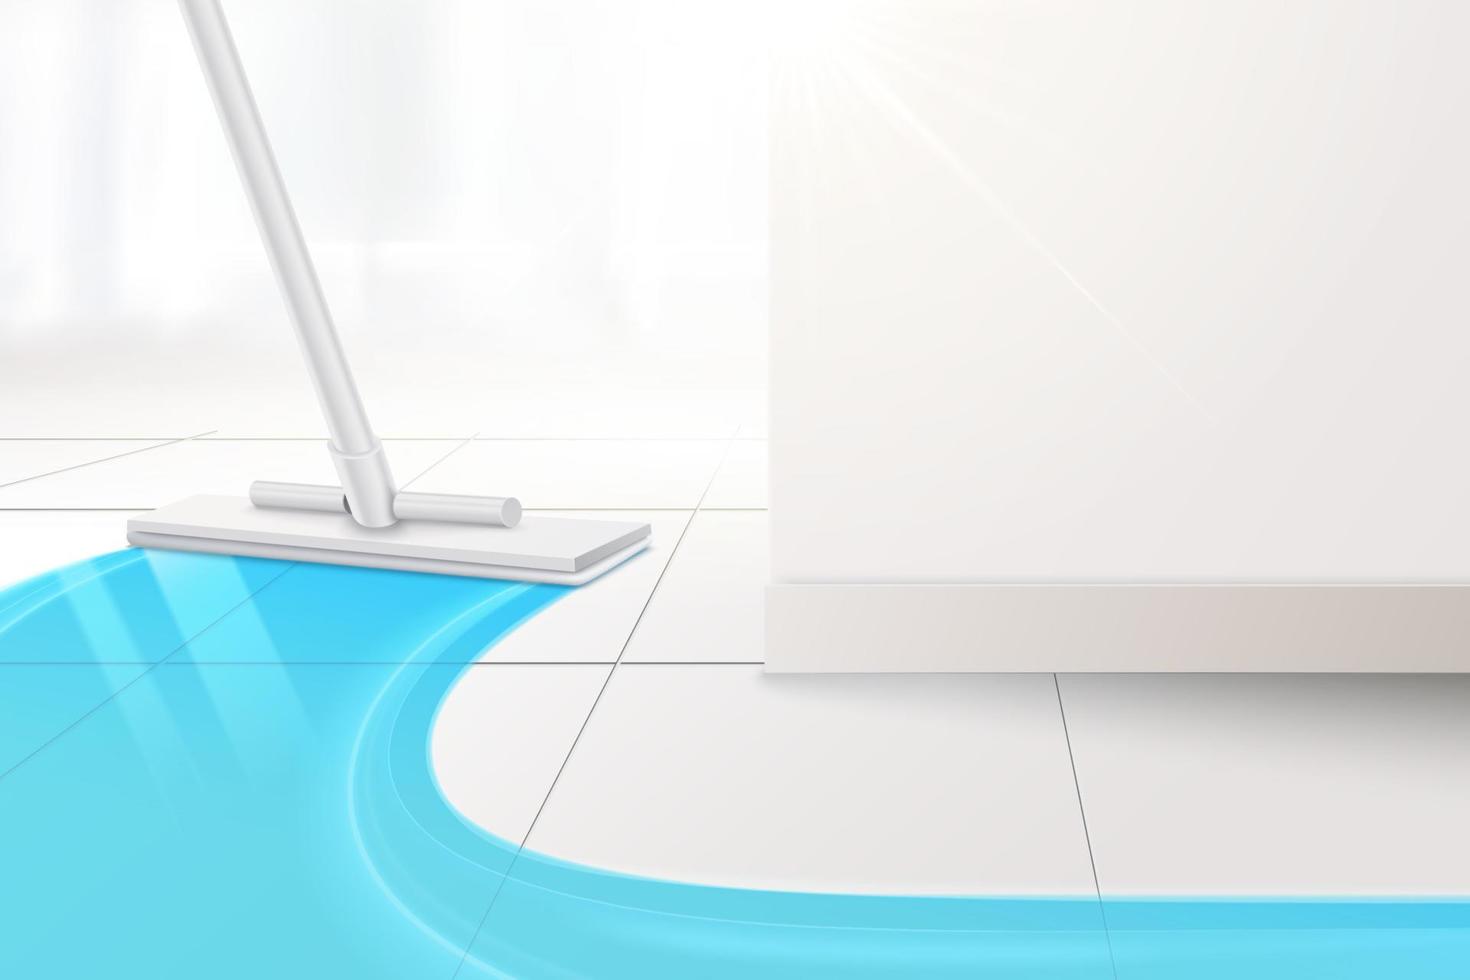 3d illustration of a realistic mop cleaning floor making a blue color on cleaned surface. Mop wiping white tiled floor indoors. vector